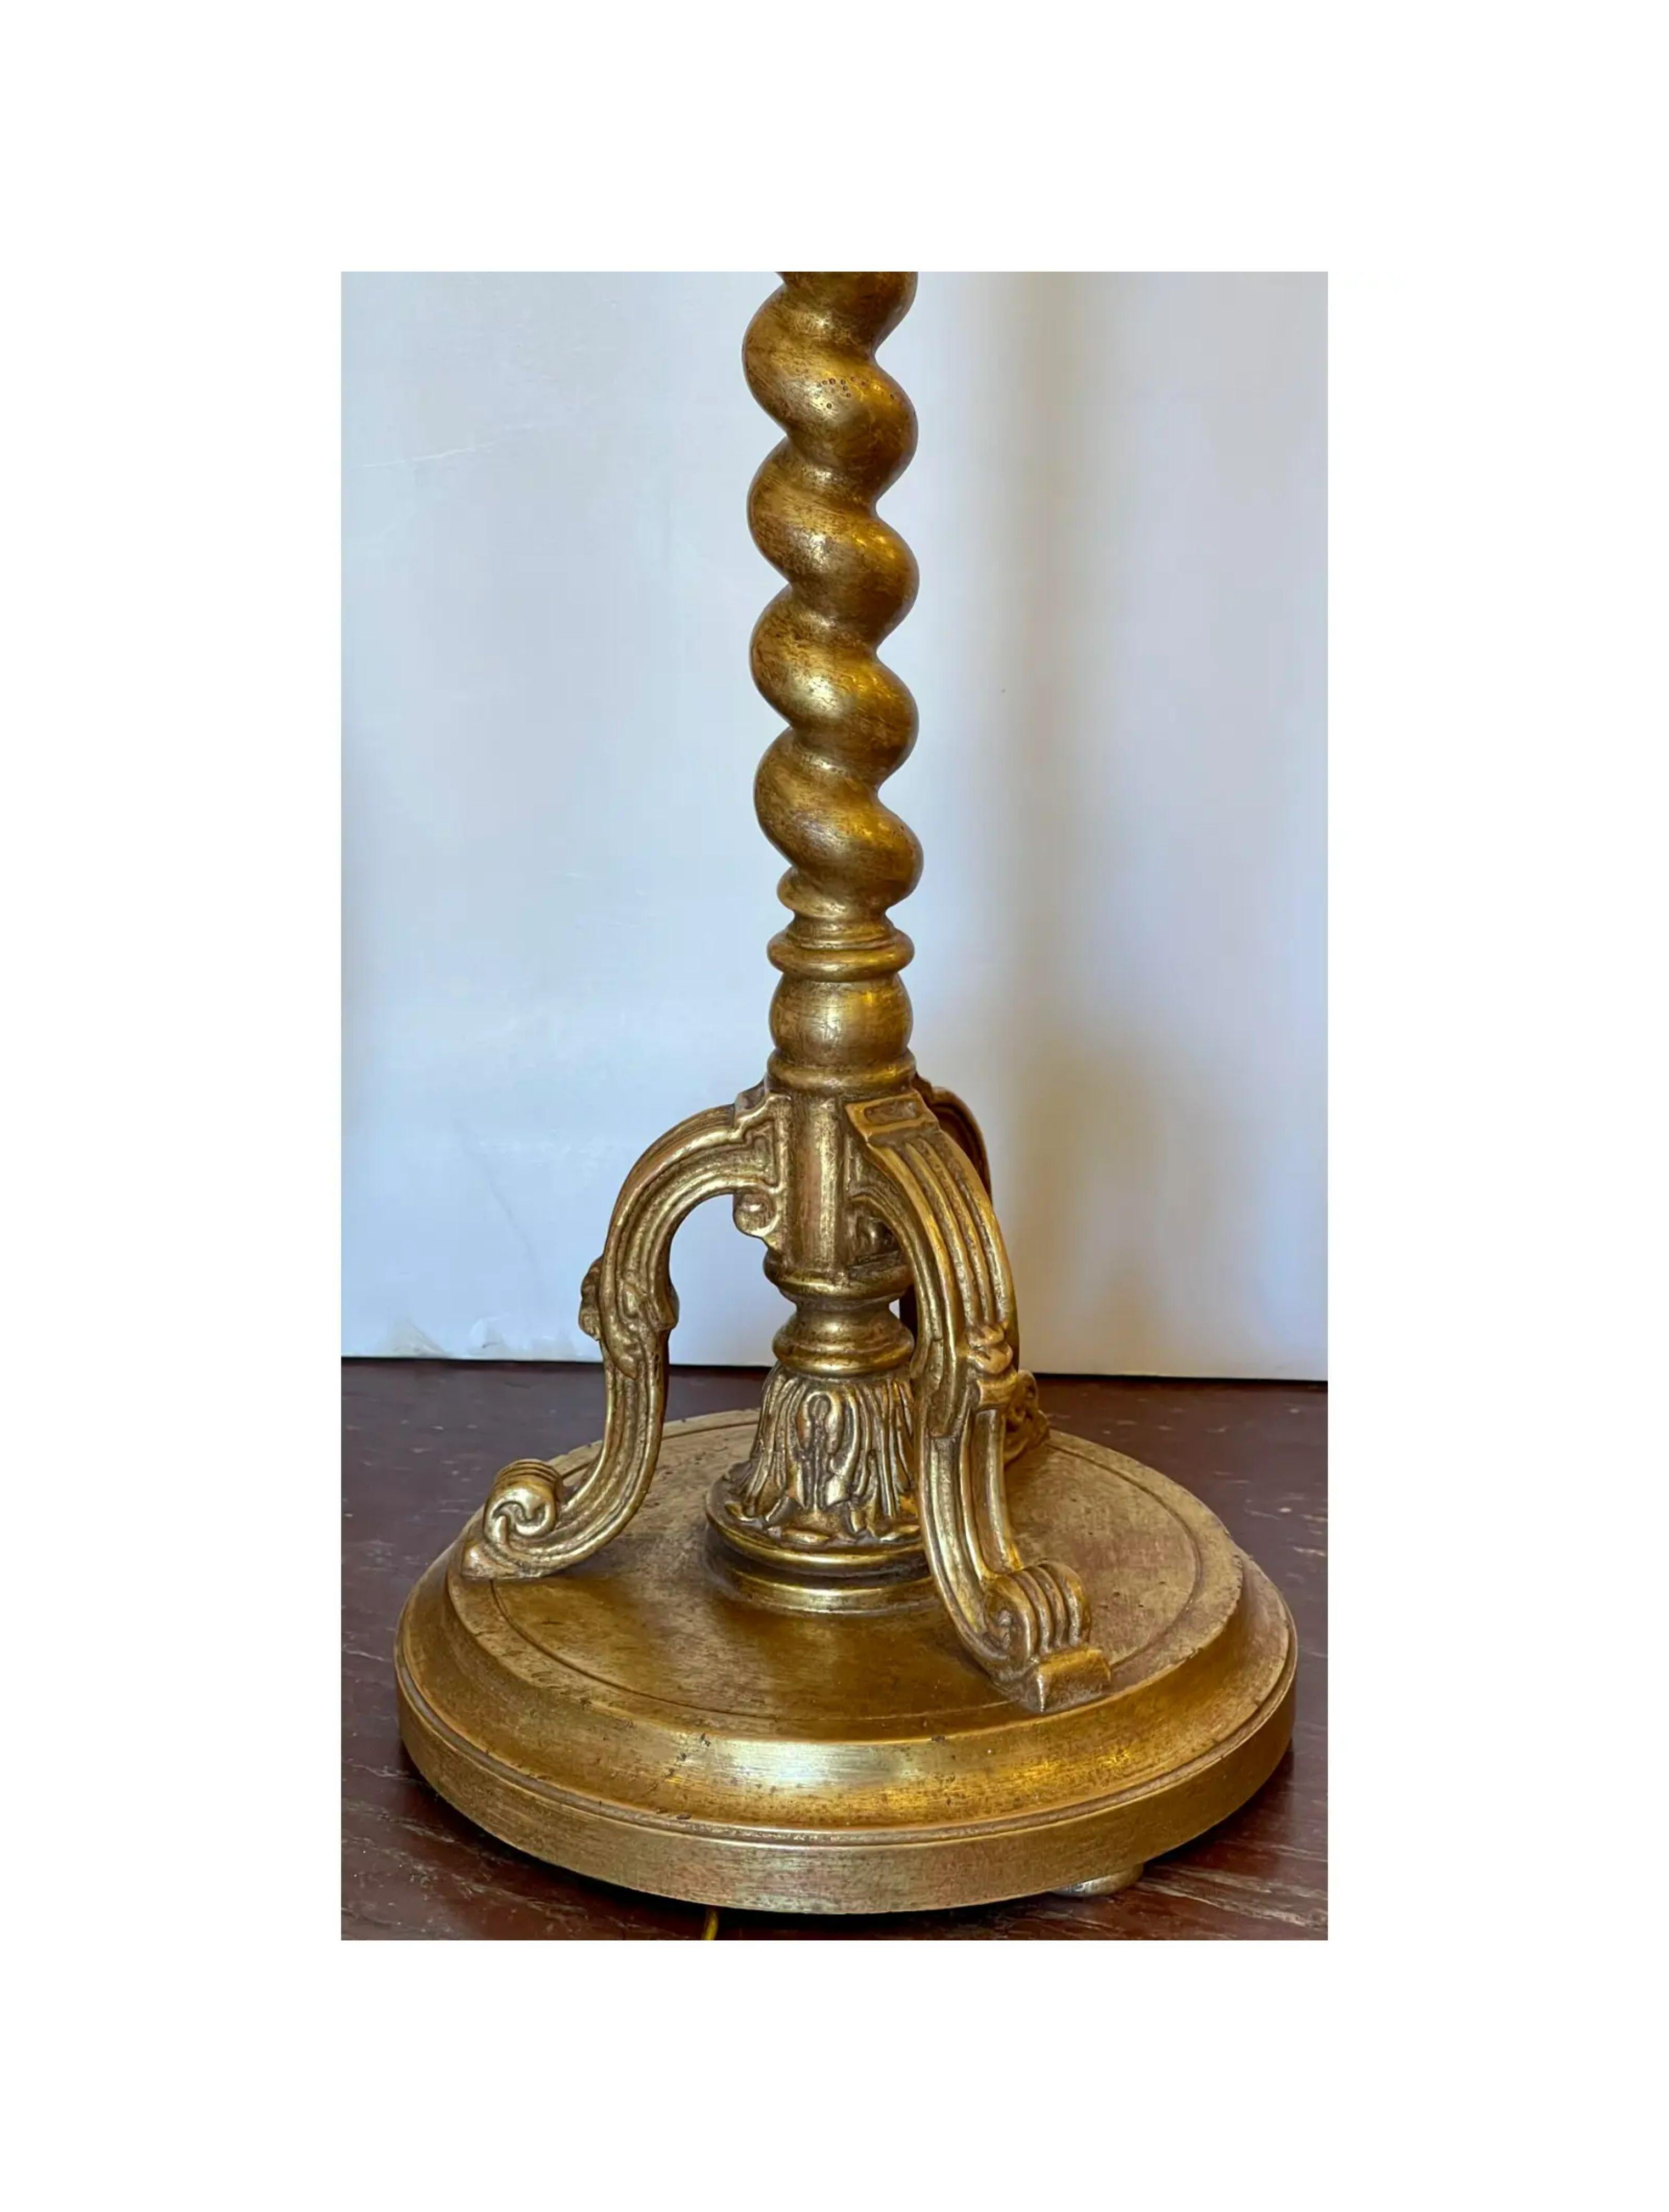 19th century Style Giltwood Venetian Rope Table Lamp by Randy Esada Designs for PROSPR

Additional information: 
Materials: Giltwood, Rope
Color: Gold
Brand: Randy Esada Designs for Prospr
Designer: Randy Esada Designs for Prospr
Period: